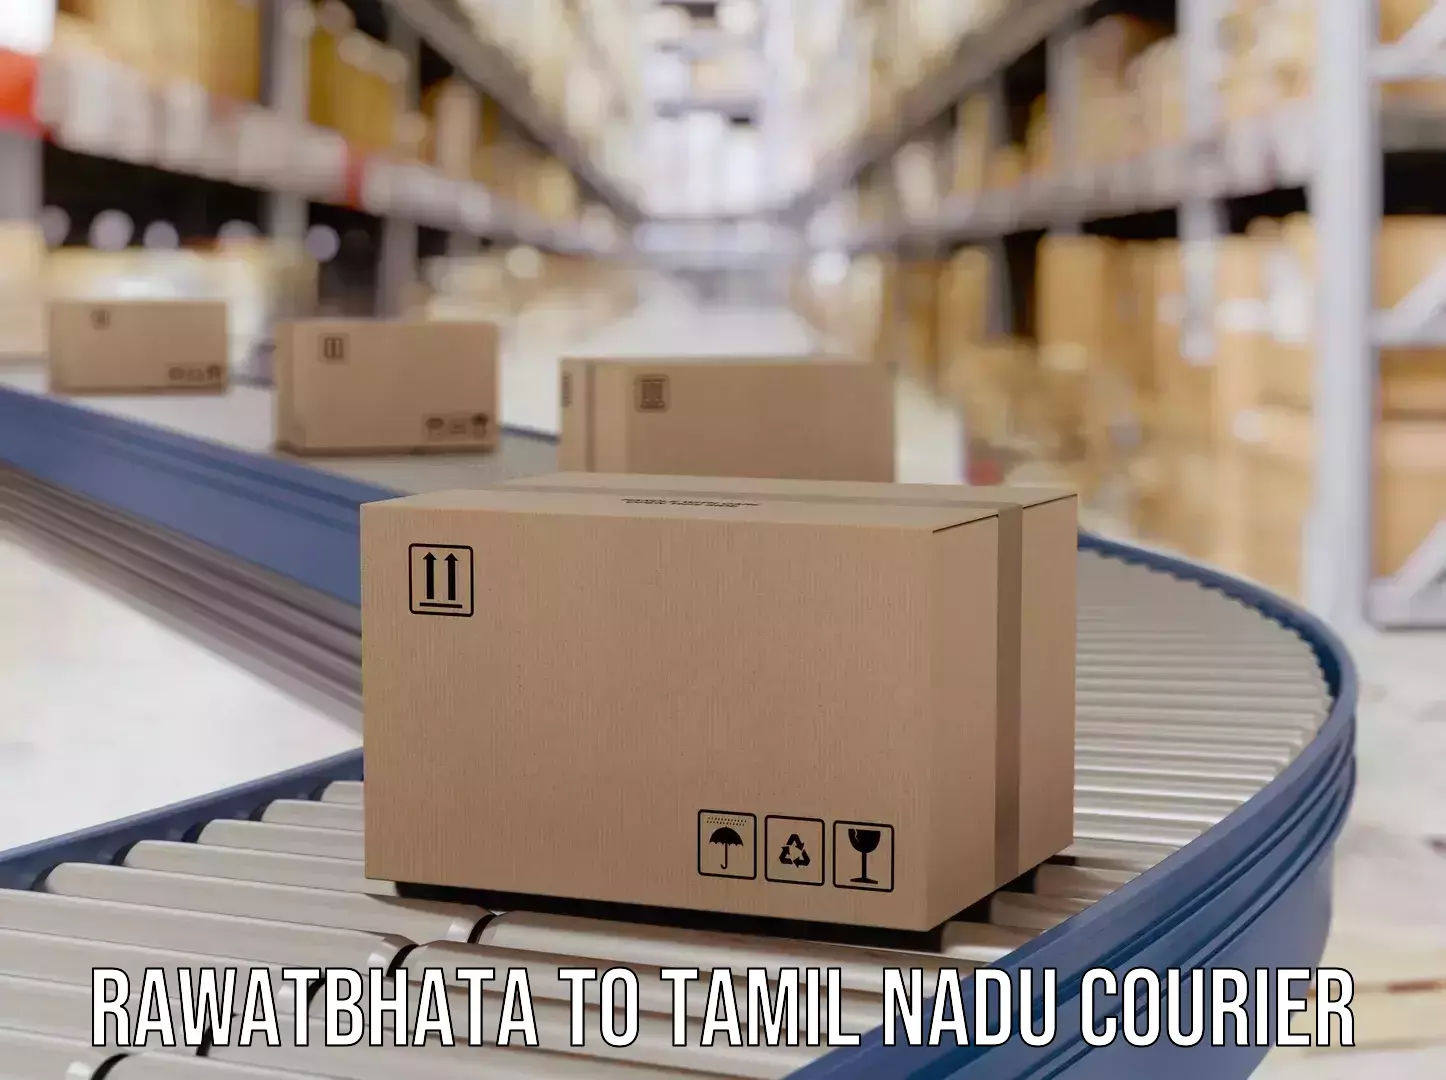 Nationwide delivery network Rawatbhata to Tamil Nadu